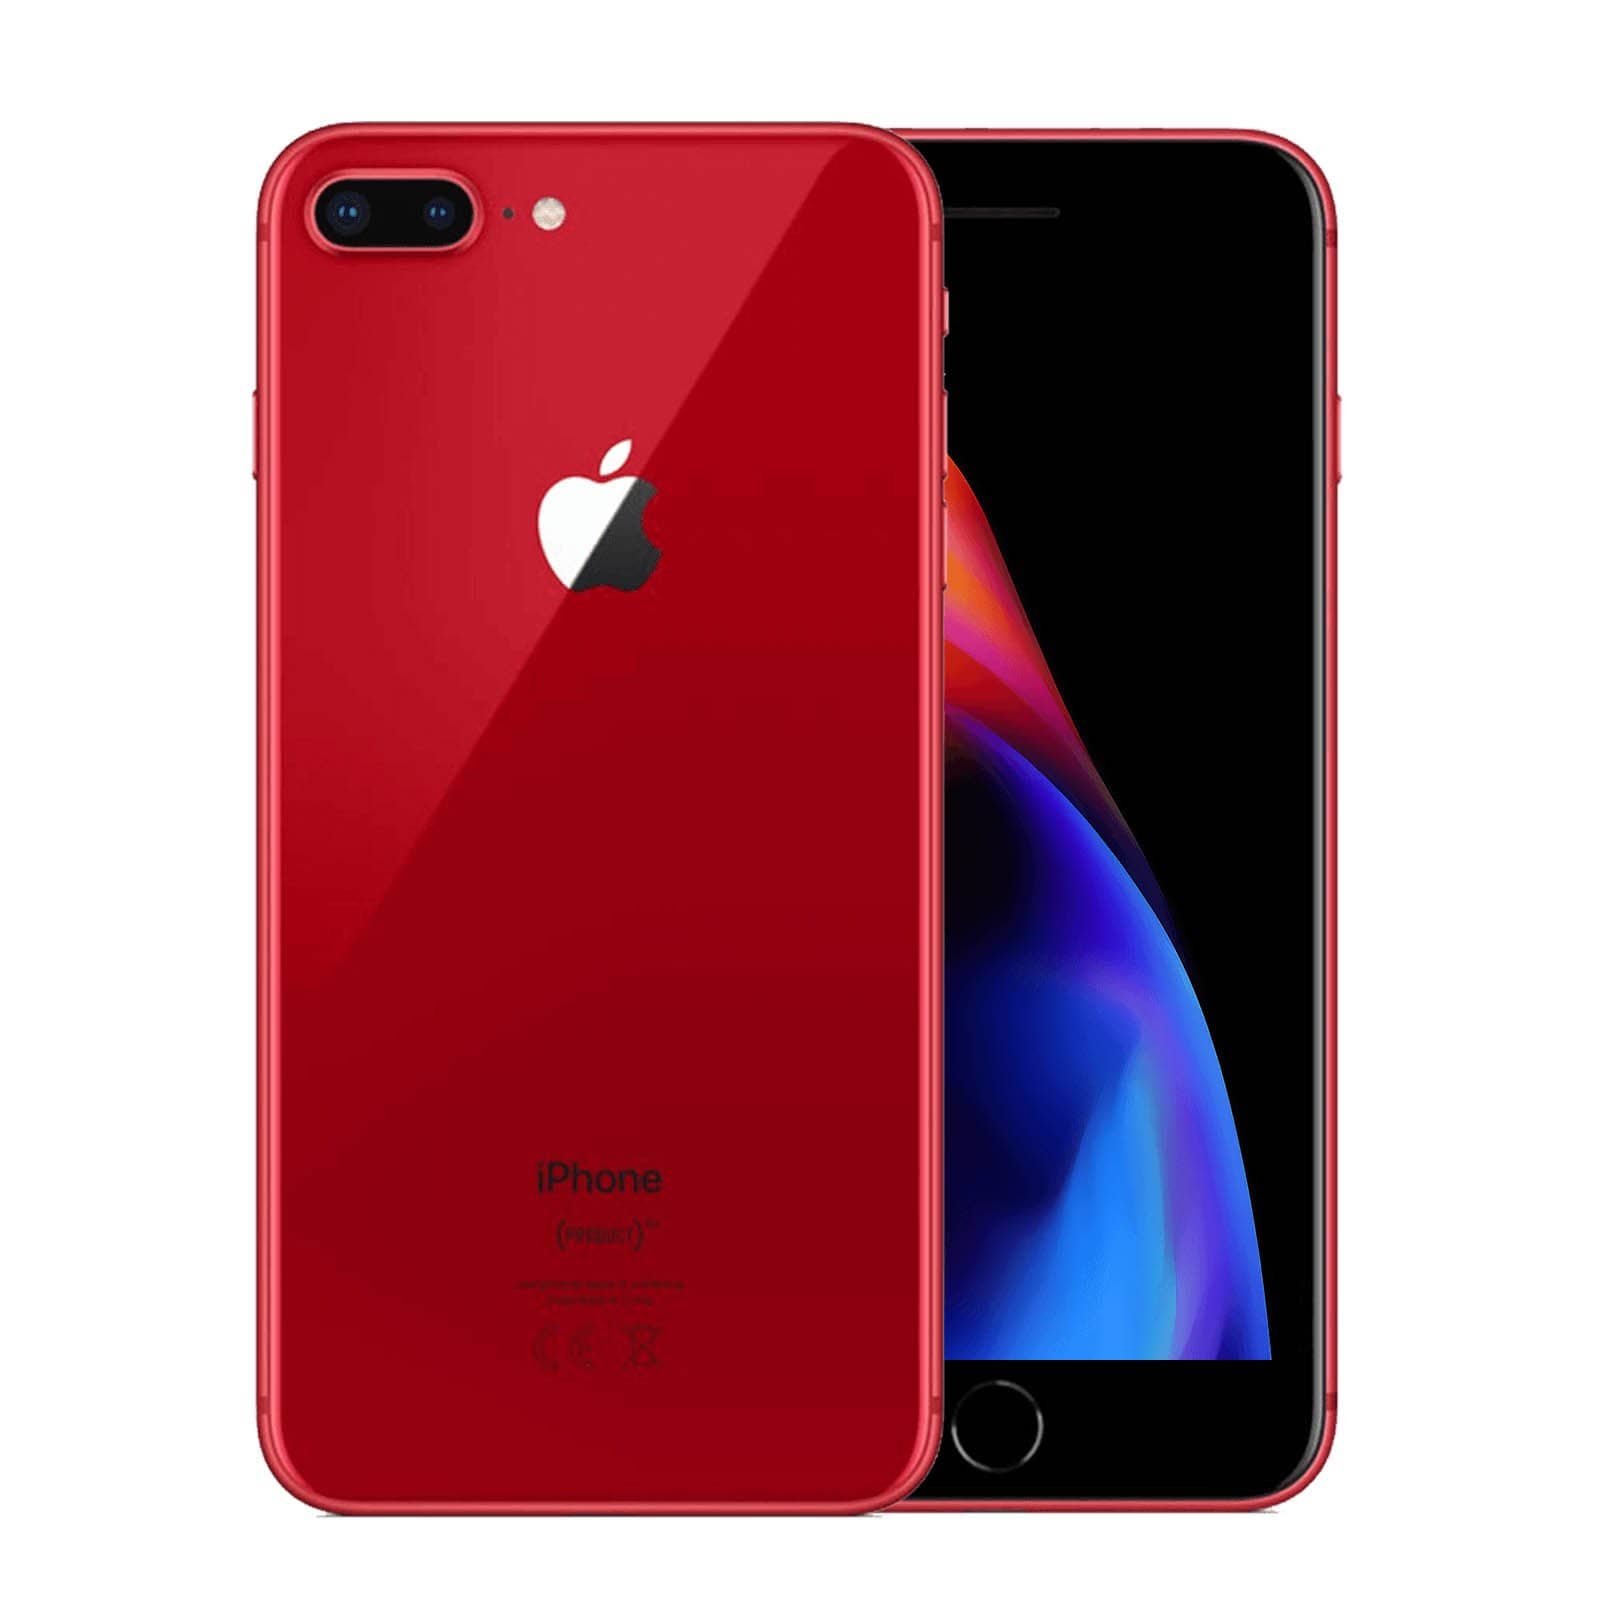 Apple iPhone 8 Plus 256GB Product Red Good - Unlocked 256GB Product Red Good